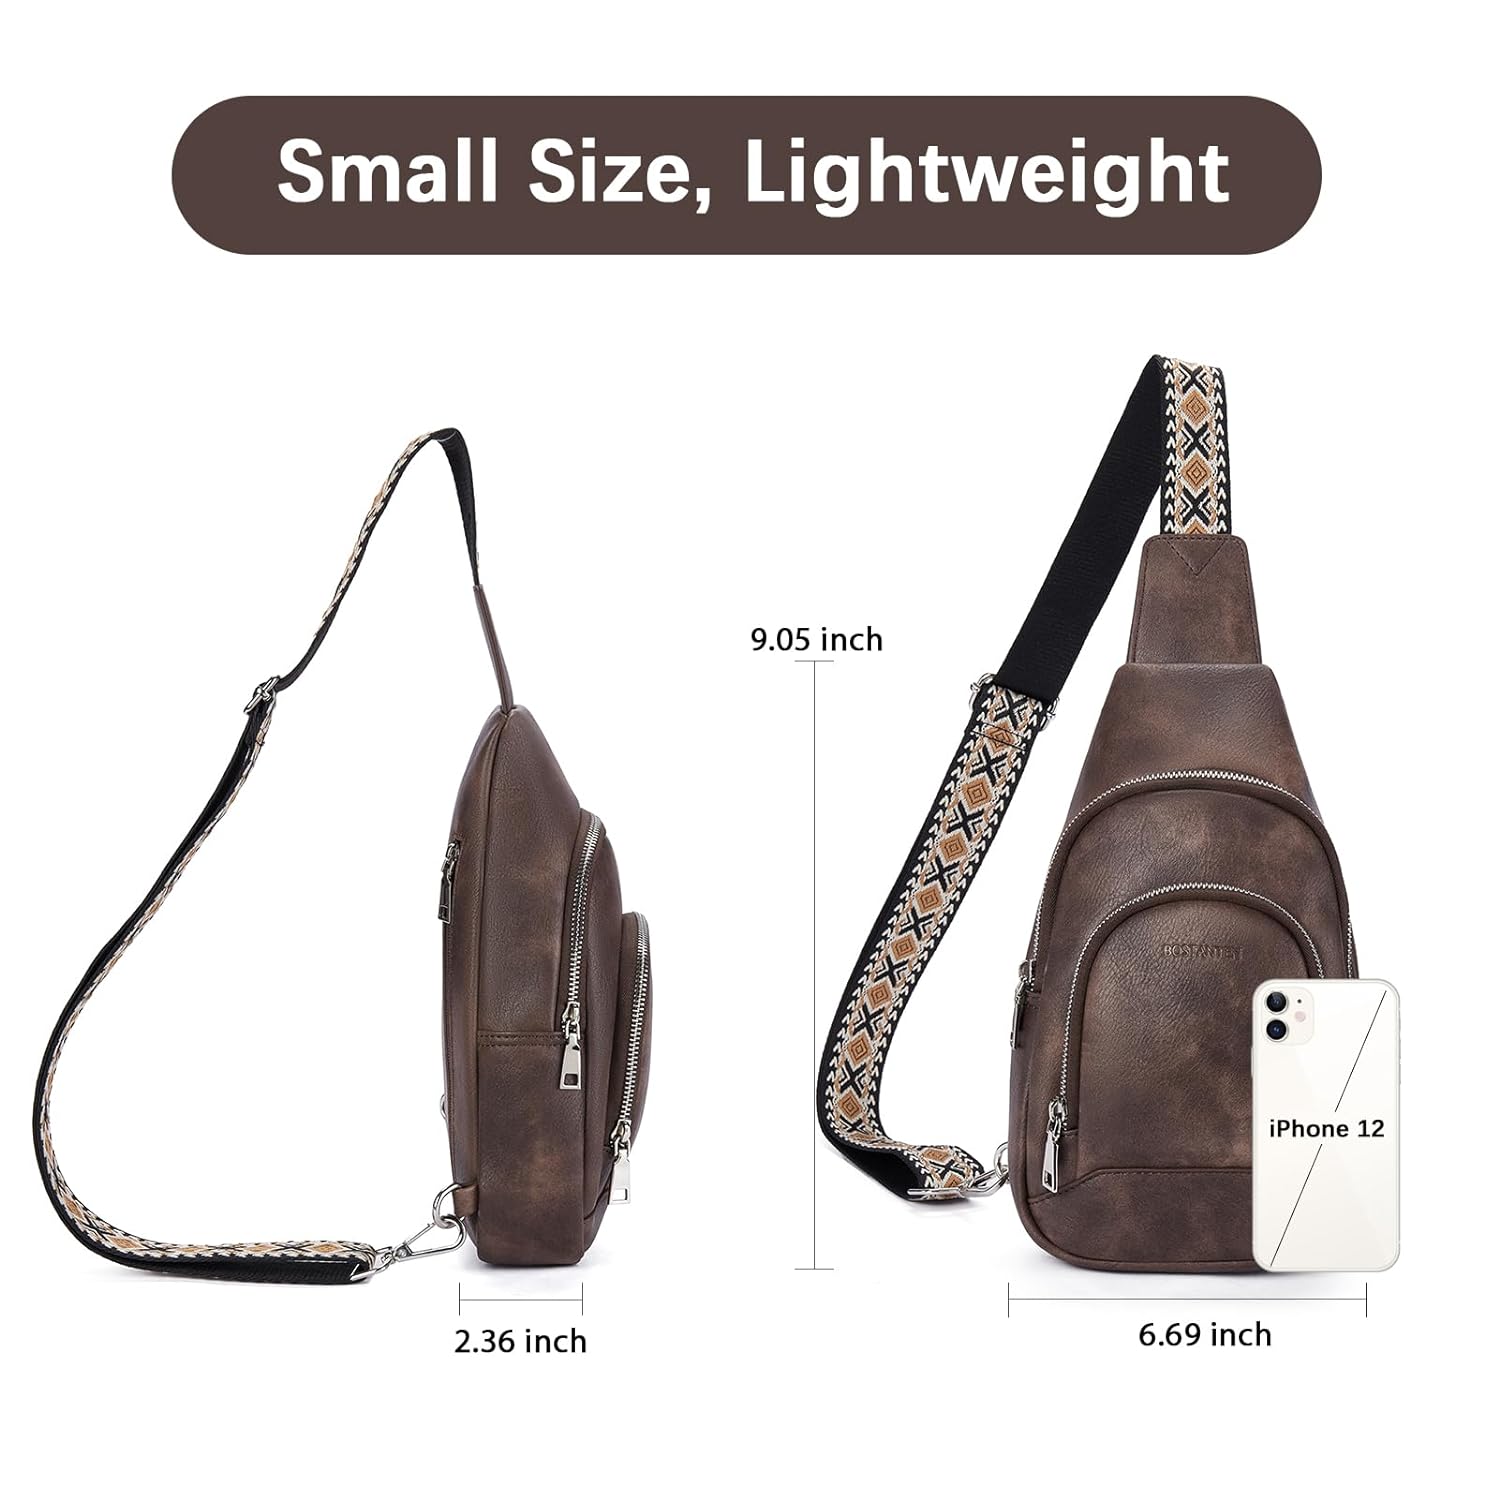 BOSTANTEN Sling Bag for Women Crossbody Purse Crossbody Bag Leather Chest Bag with Adjustable Guitar Strap for Travel, Coffee Brown, Fashion